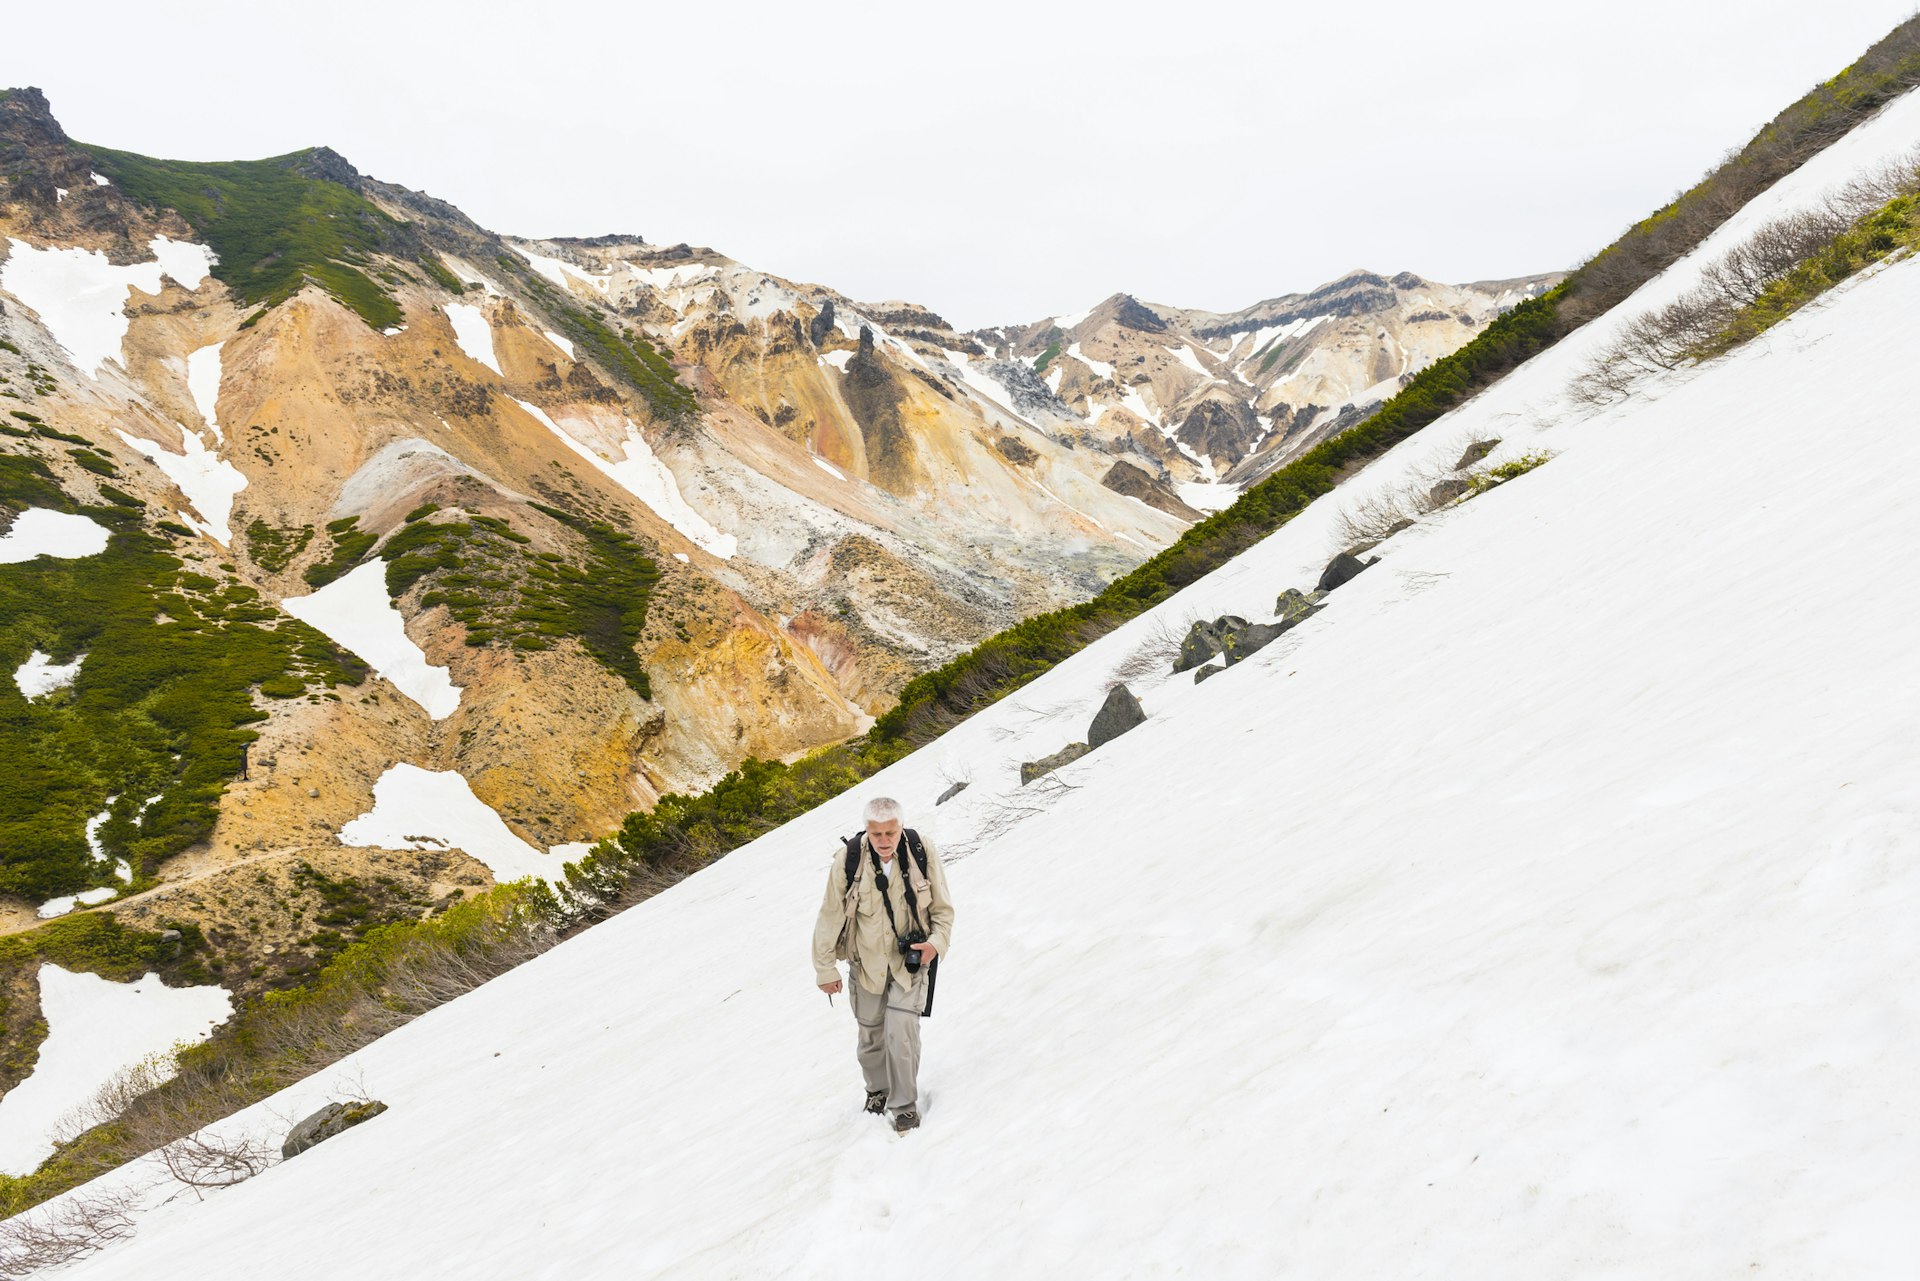 A senior male hiker walks along a snow-covered slope with beige and brown volcanic hills behind him